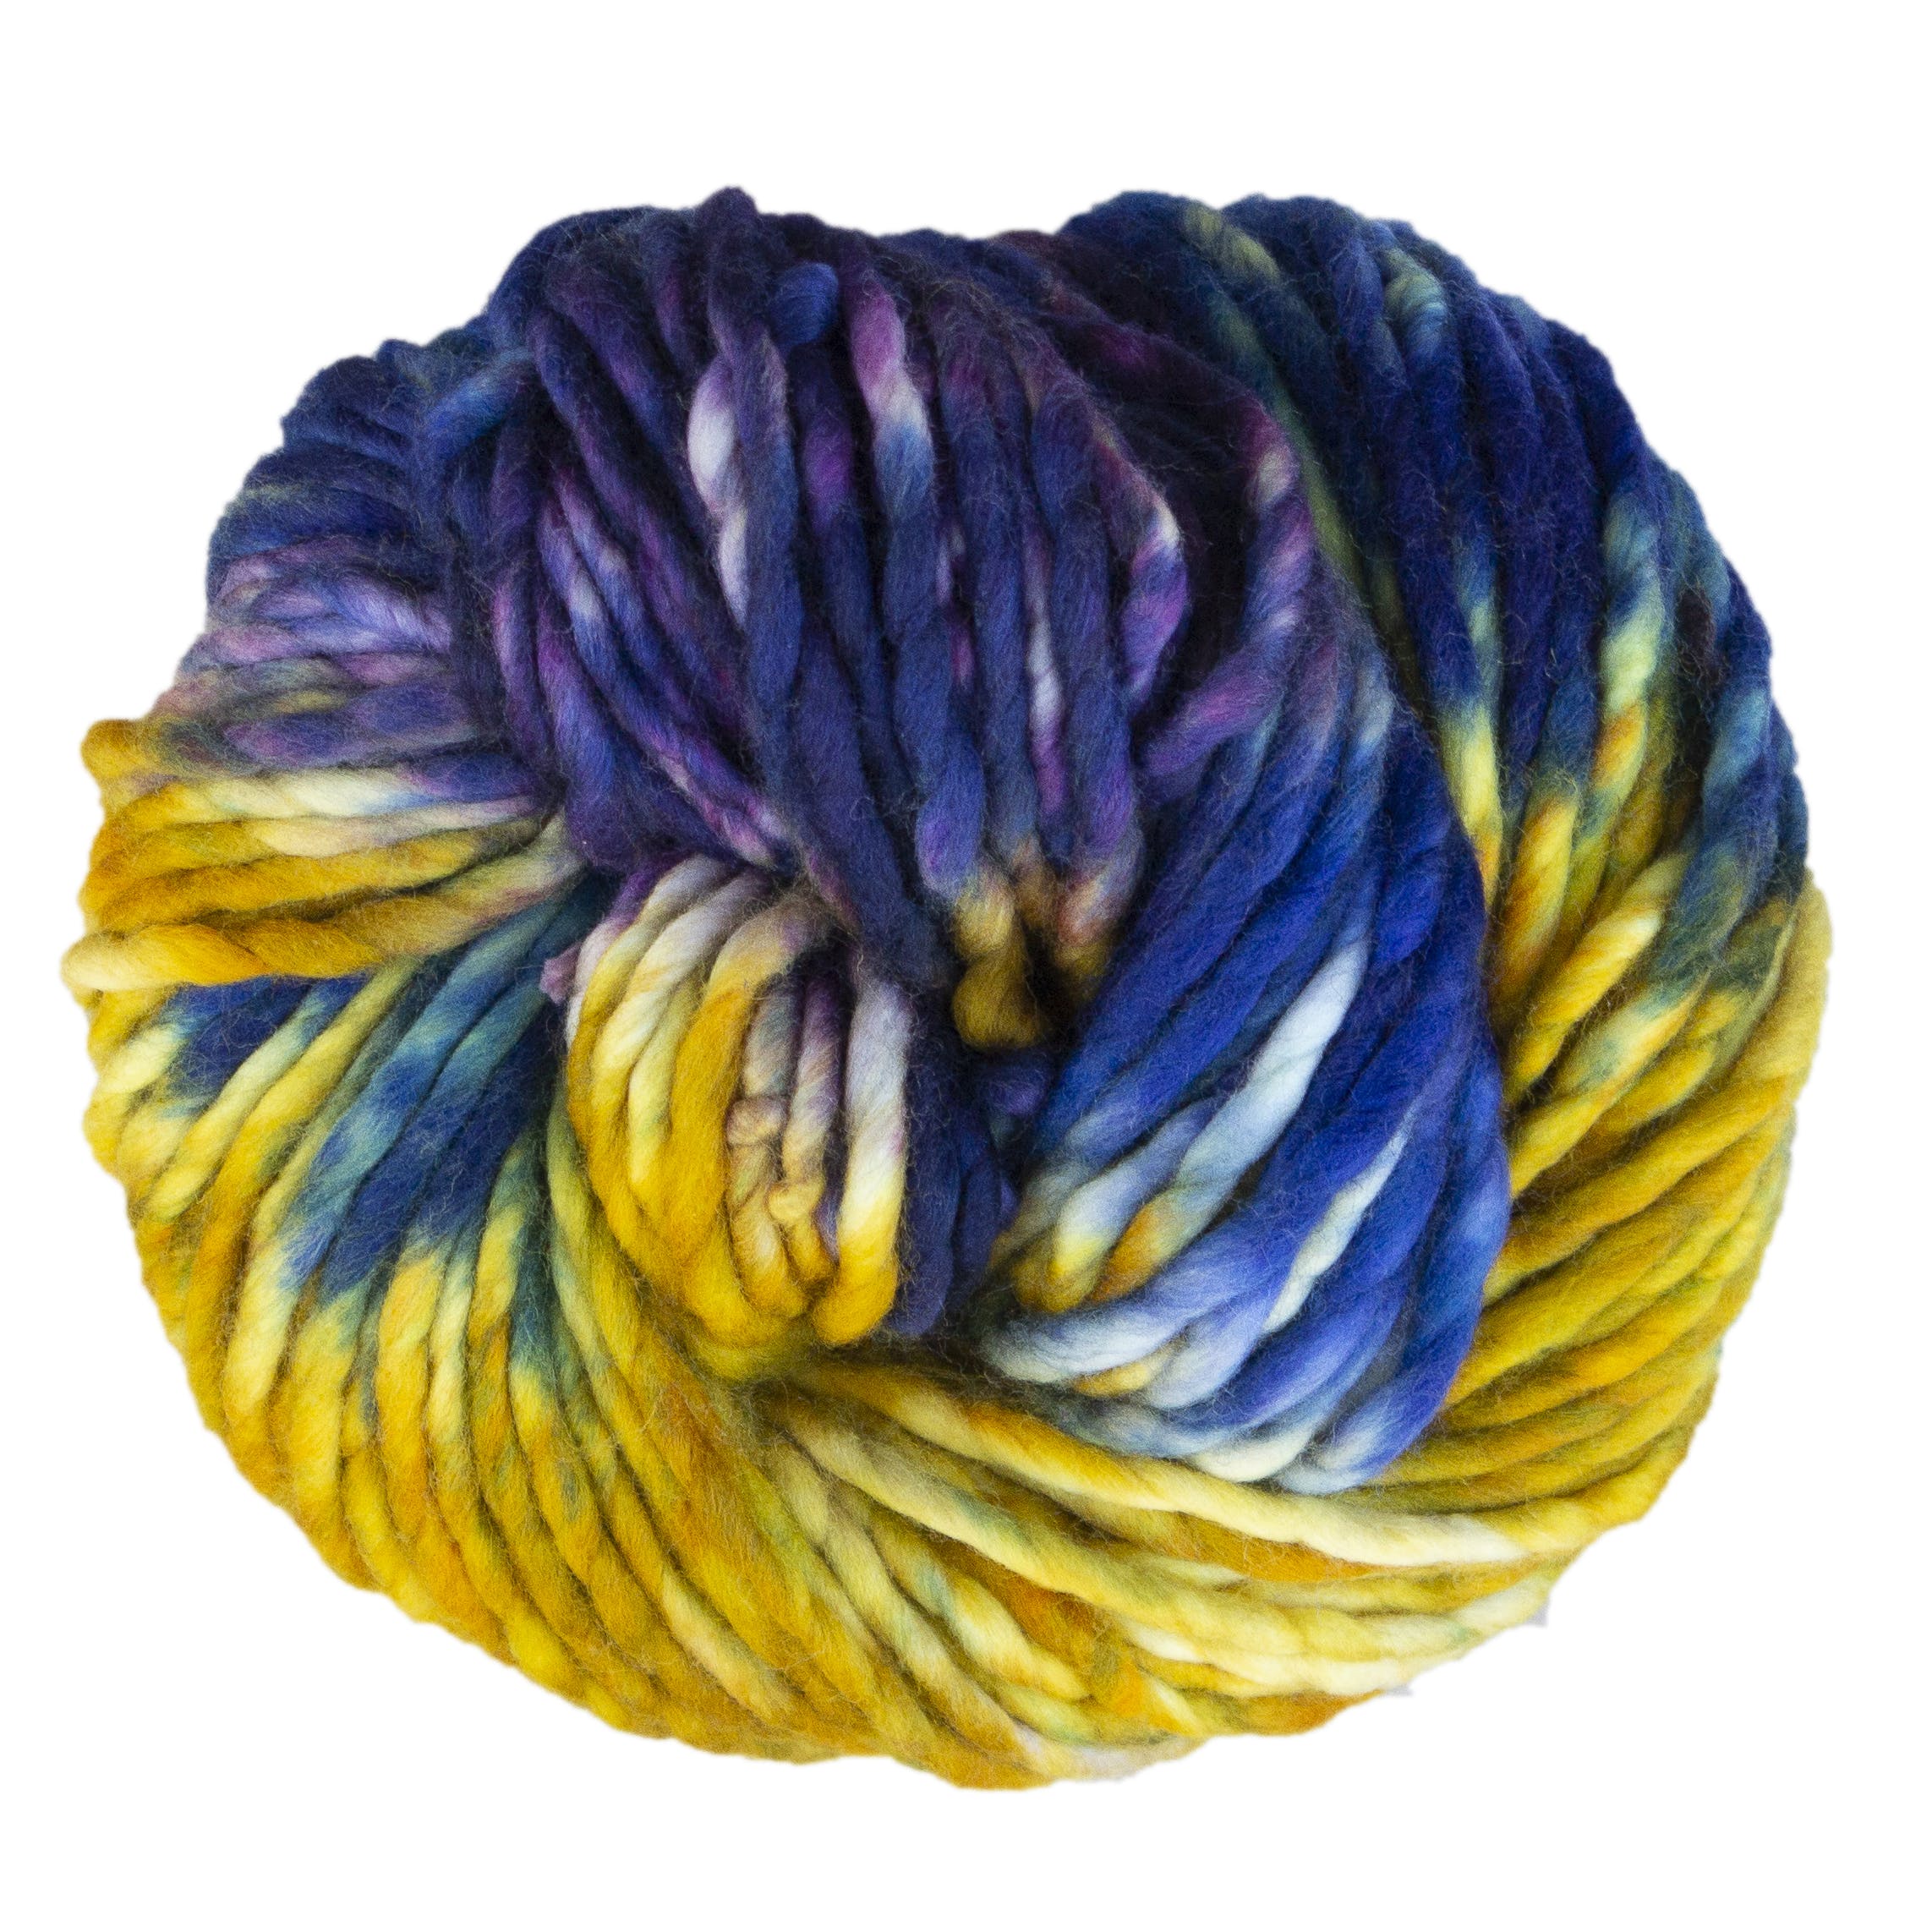 Skein of Malabrigo Rasta Super Bulky weight yarn in the color Pensamiento (Yellow) for knitting and crocheting.